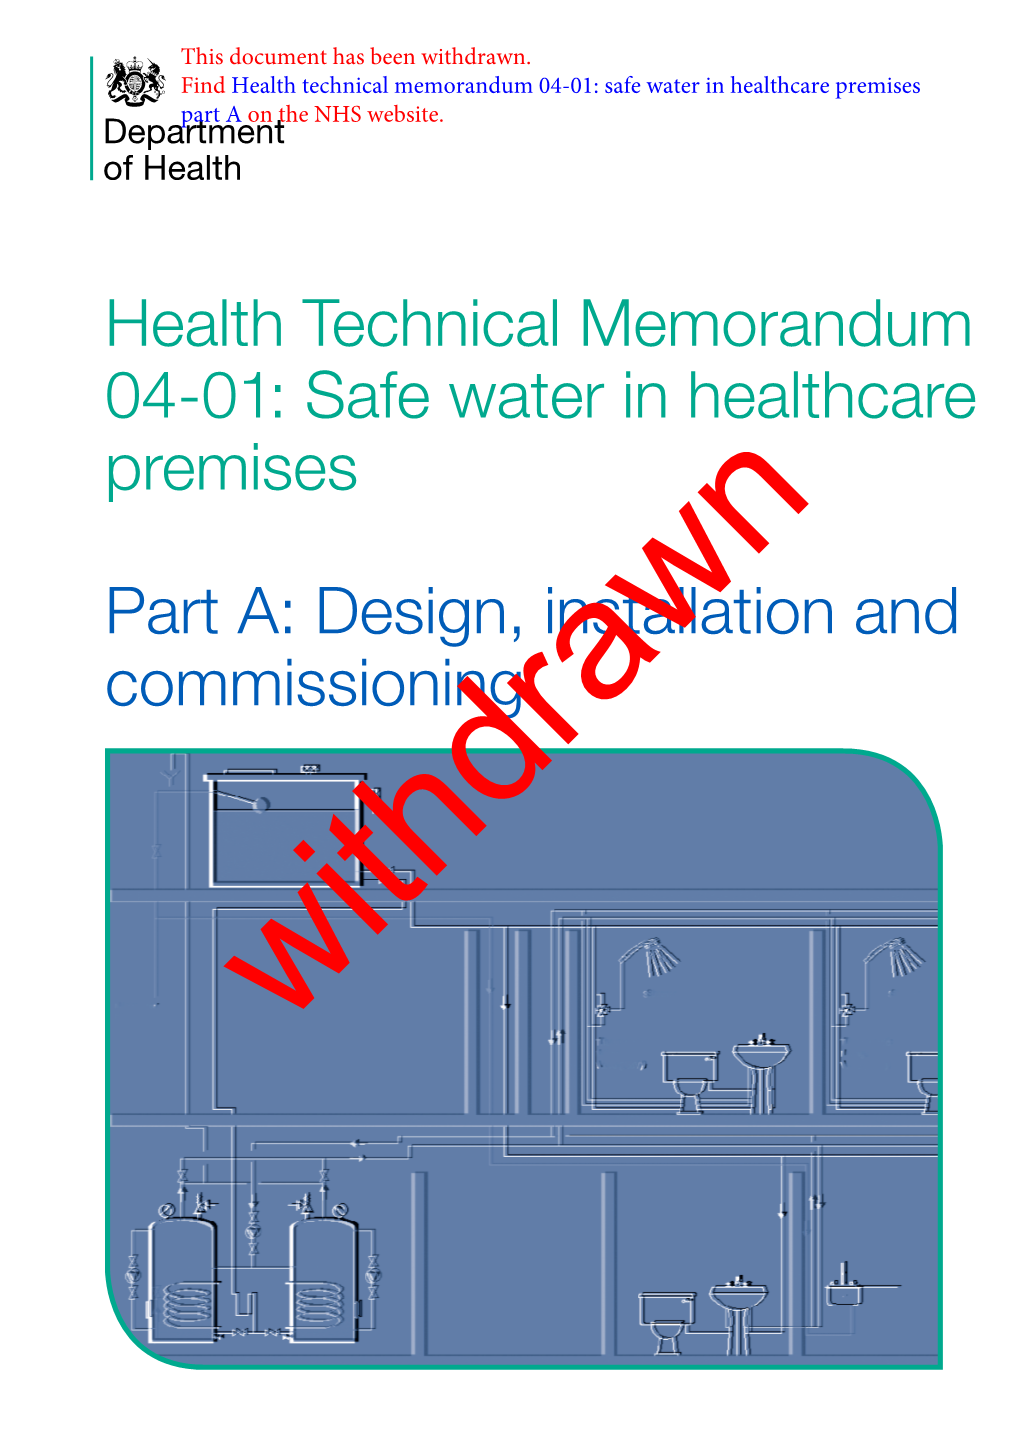 Health Technical Memorandum 04-01: Safe Water in Healthcare Premises Part a on the NHS Website